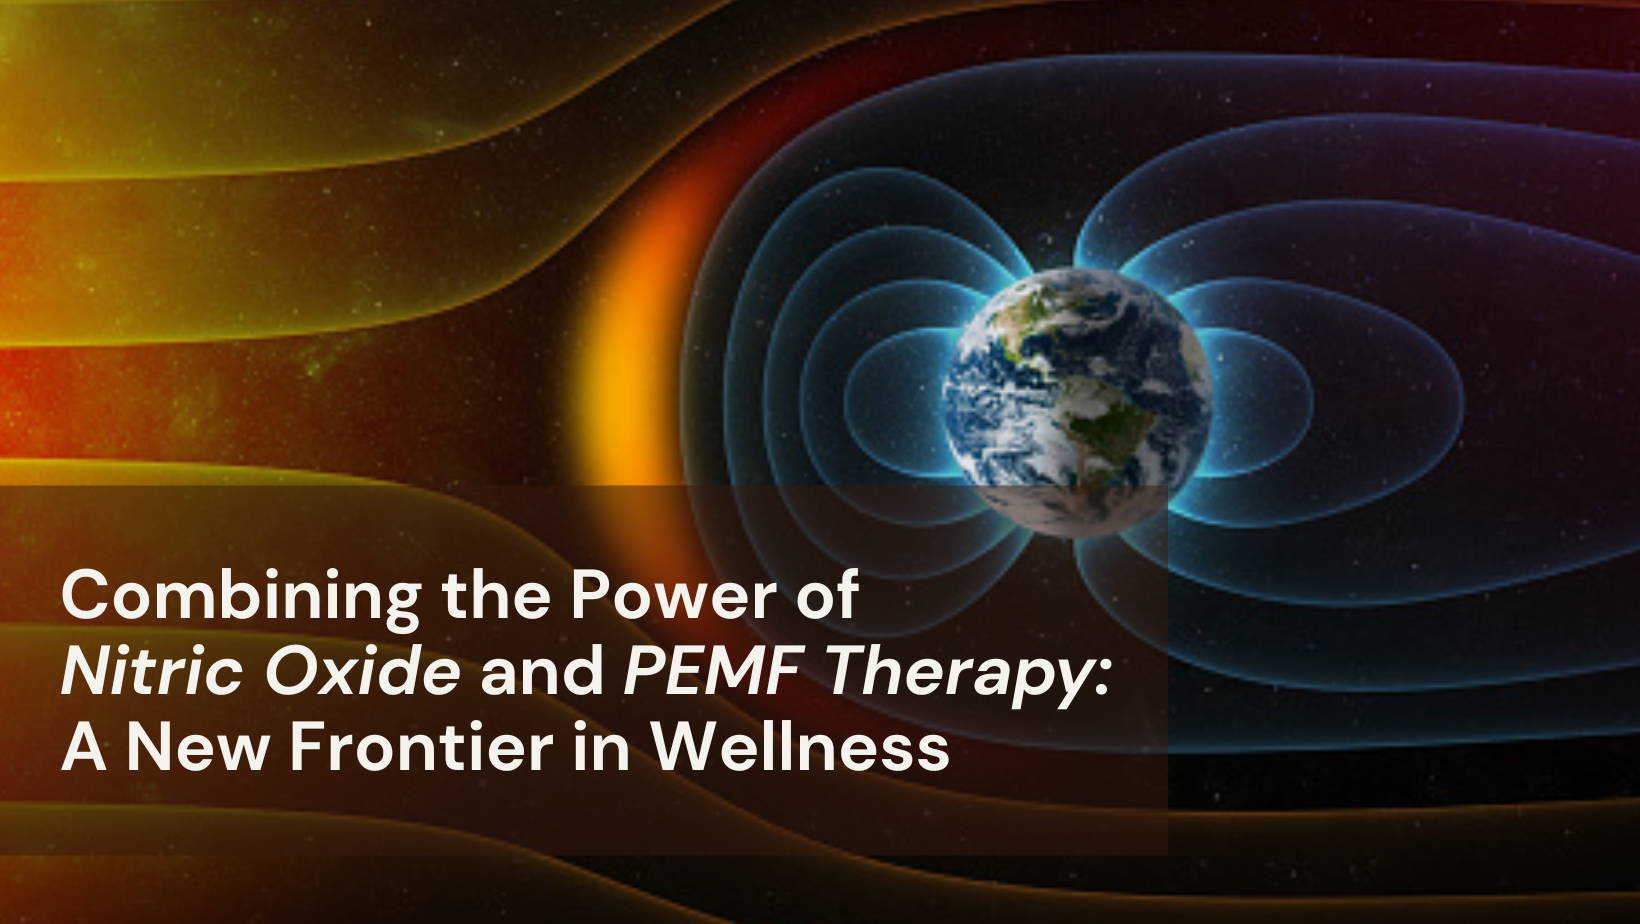 Combining the power of Nitric Oxide and PEMF therapy: A new frontier in wellness